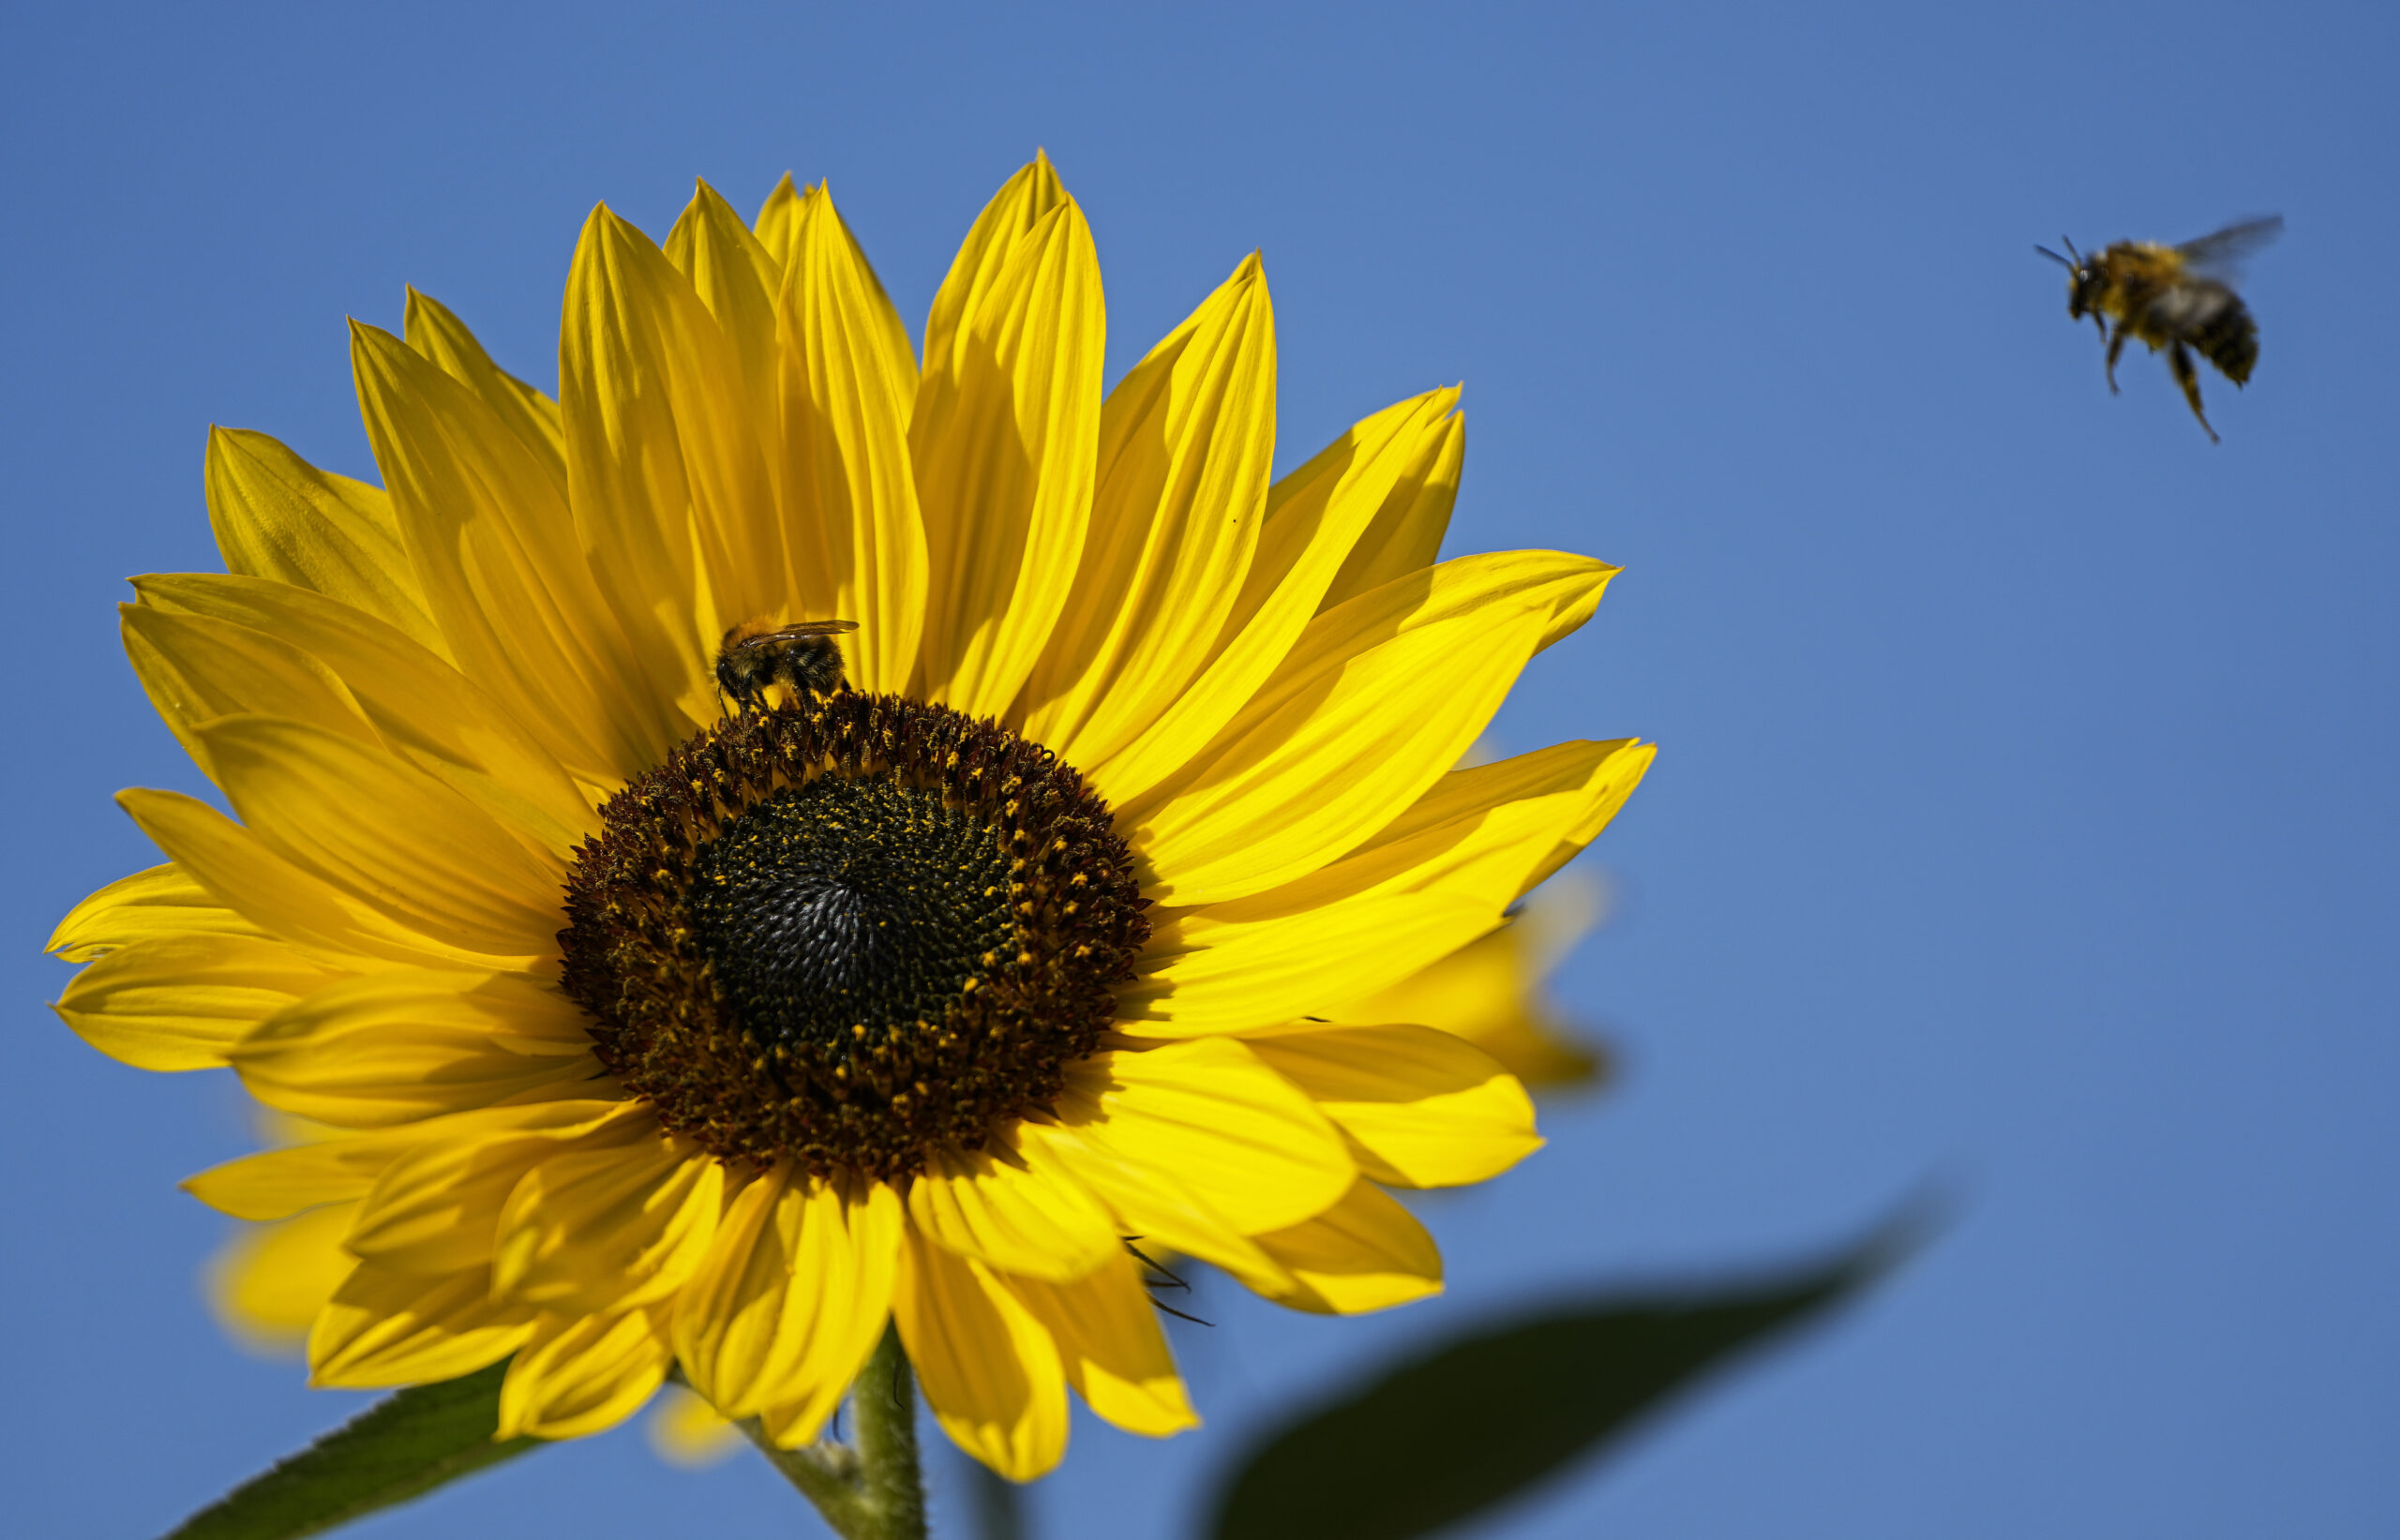 A bee lands on a blooming sunflower. Another bee hovers nearby.